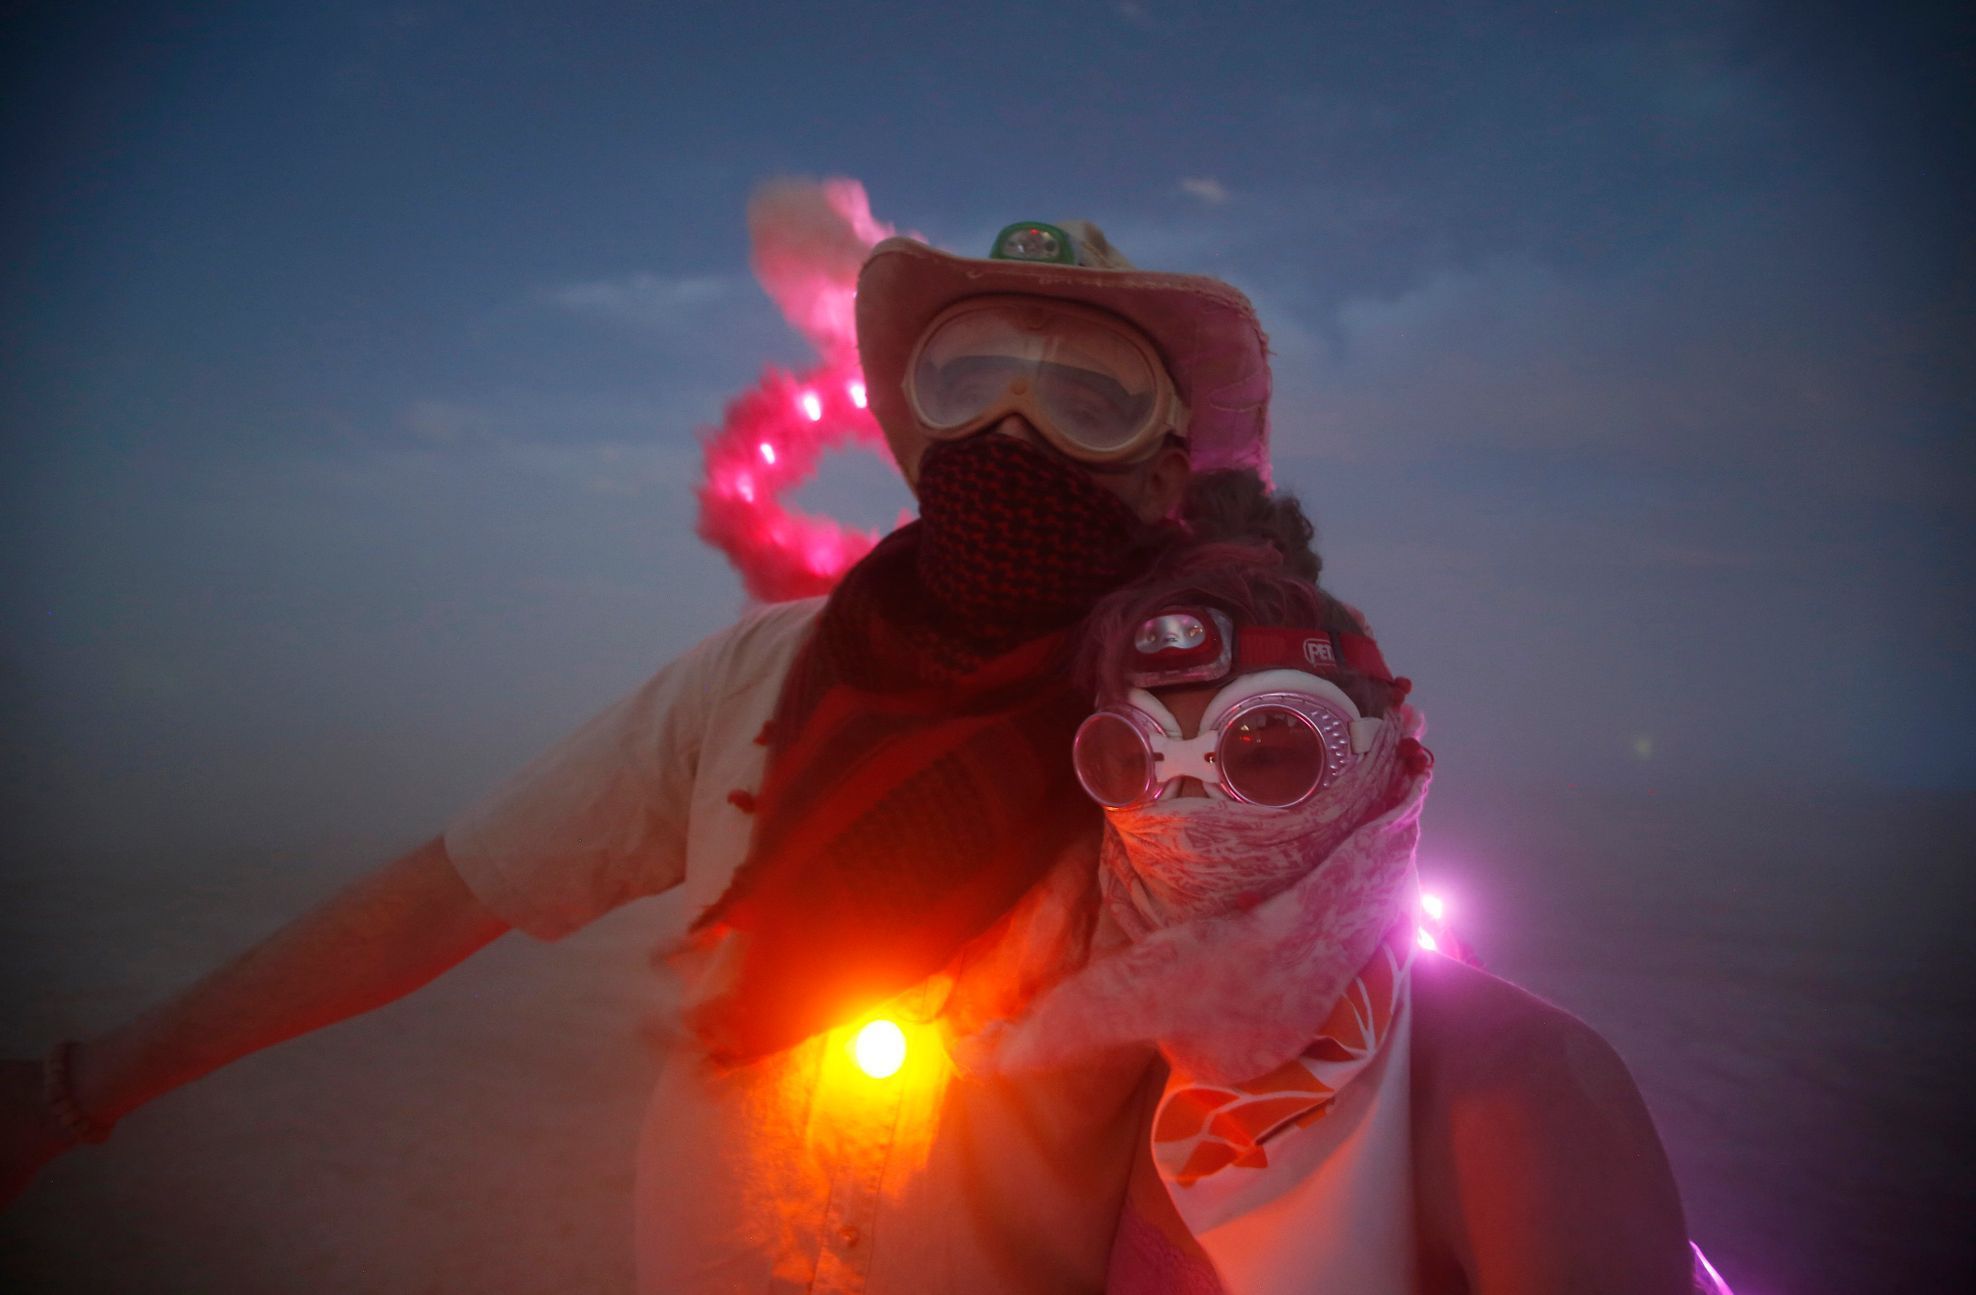 Wade Harrell and his wife Heather Harrell geared up for the dust during the Burning Man 2014 &quot;Caravansary&quot; arts and music festival in the Black Rock Desert of Nevada